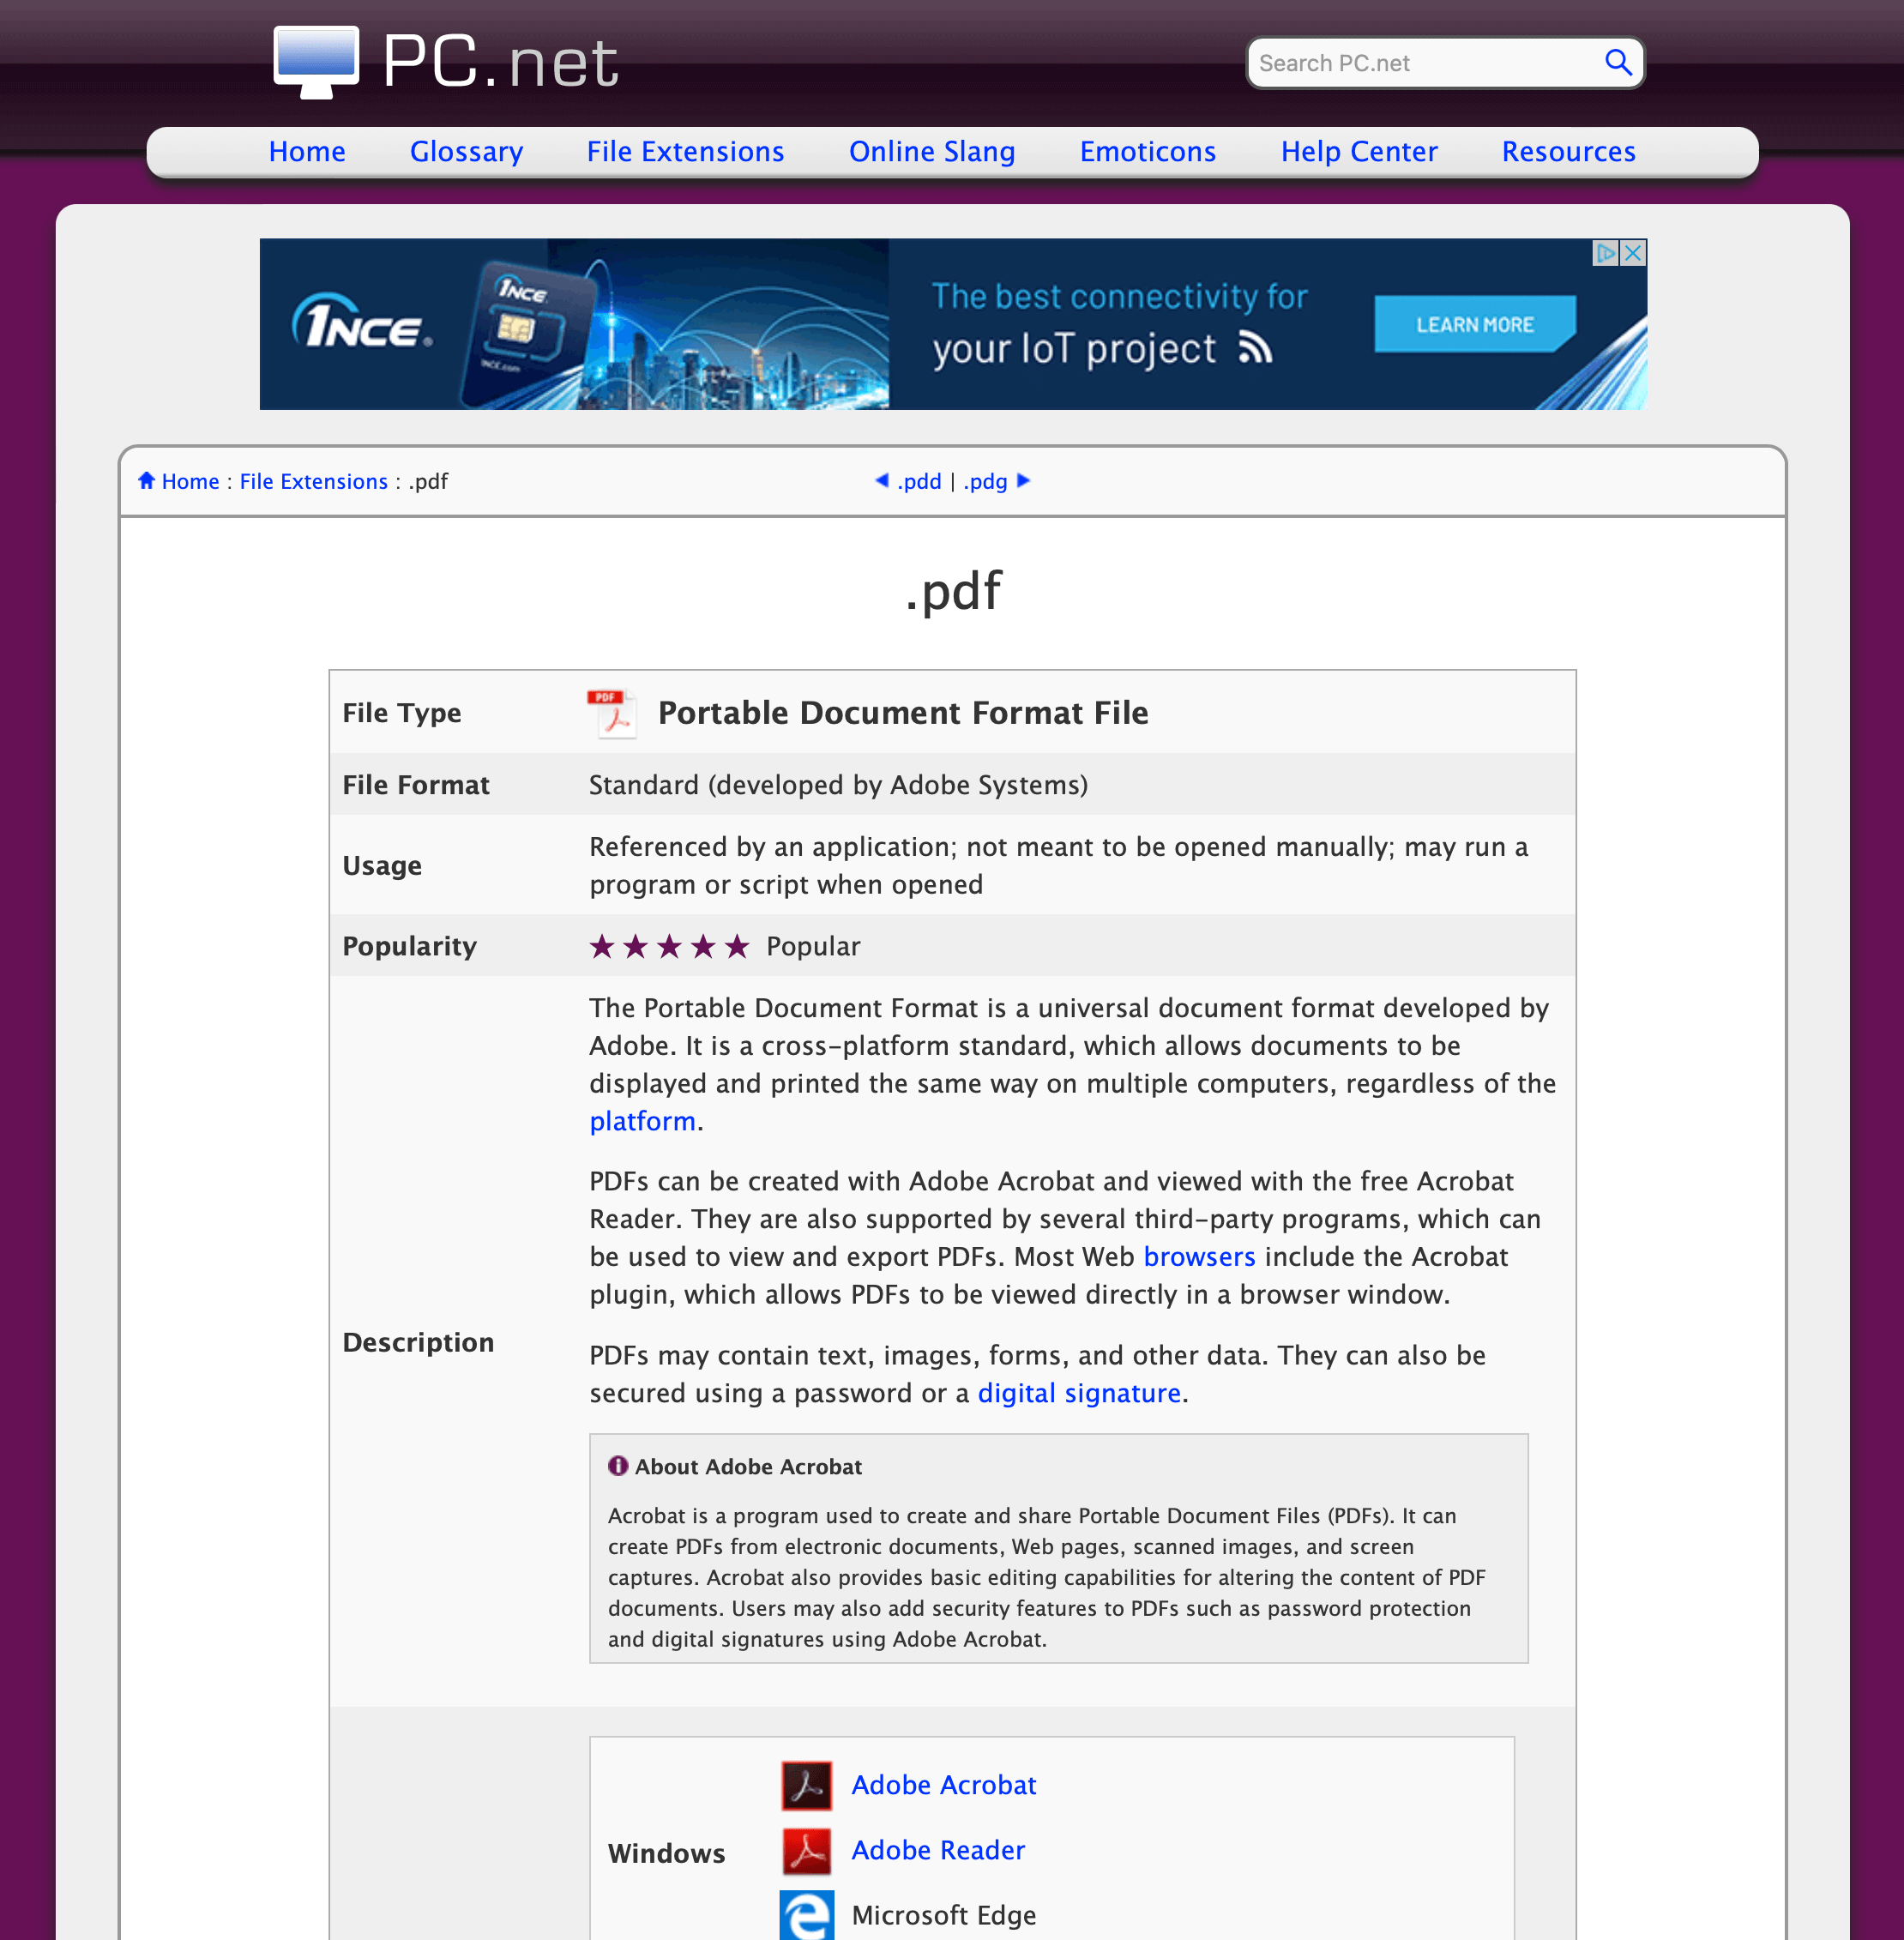 2010 PC.net File Extension Page